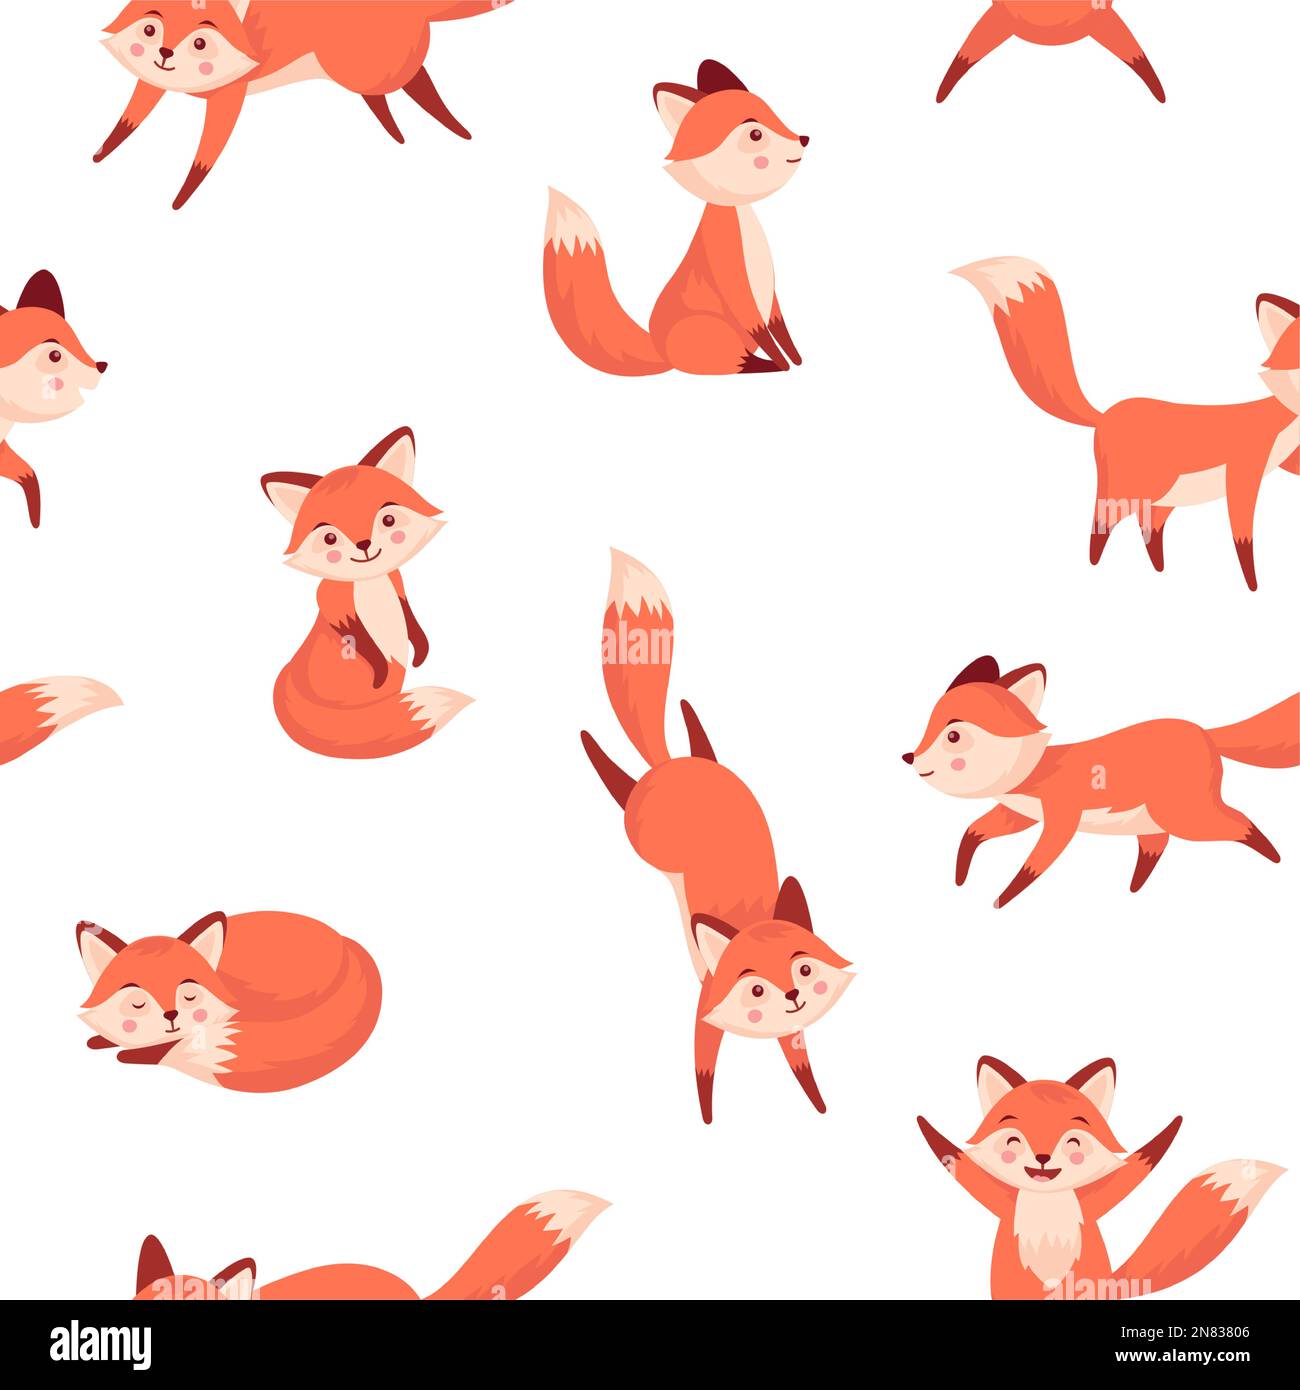 Cartoon fox pattern. Seamless print with cute forest animal characters in different poses for wrapping, wallpaper, fabric, endless background. Vector Stock Vector